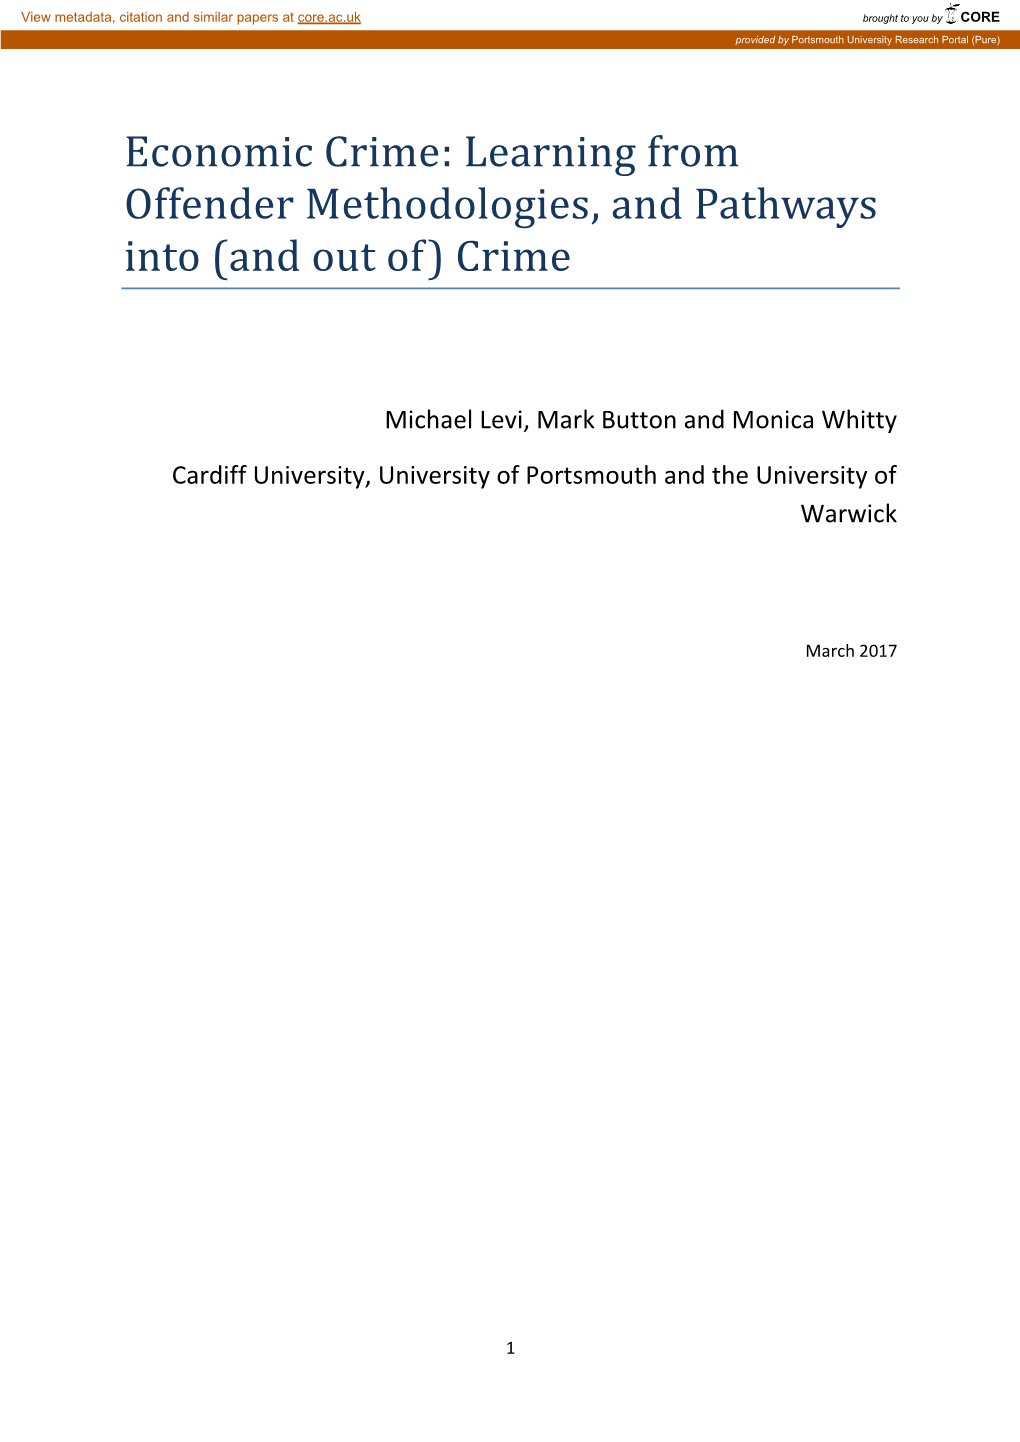 Learning from Offender Methodologies, and Pathways Into (And out Of) Crime